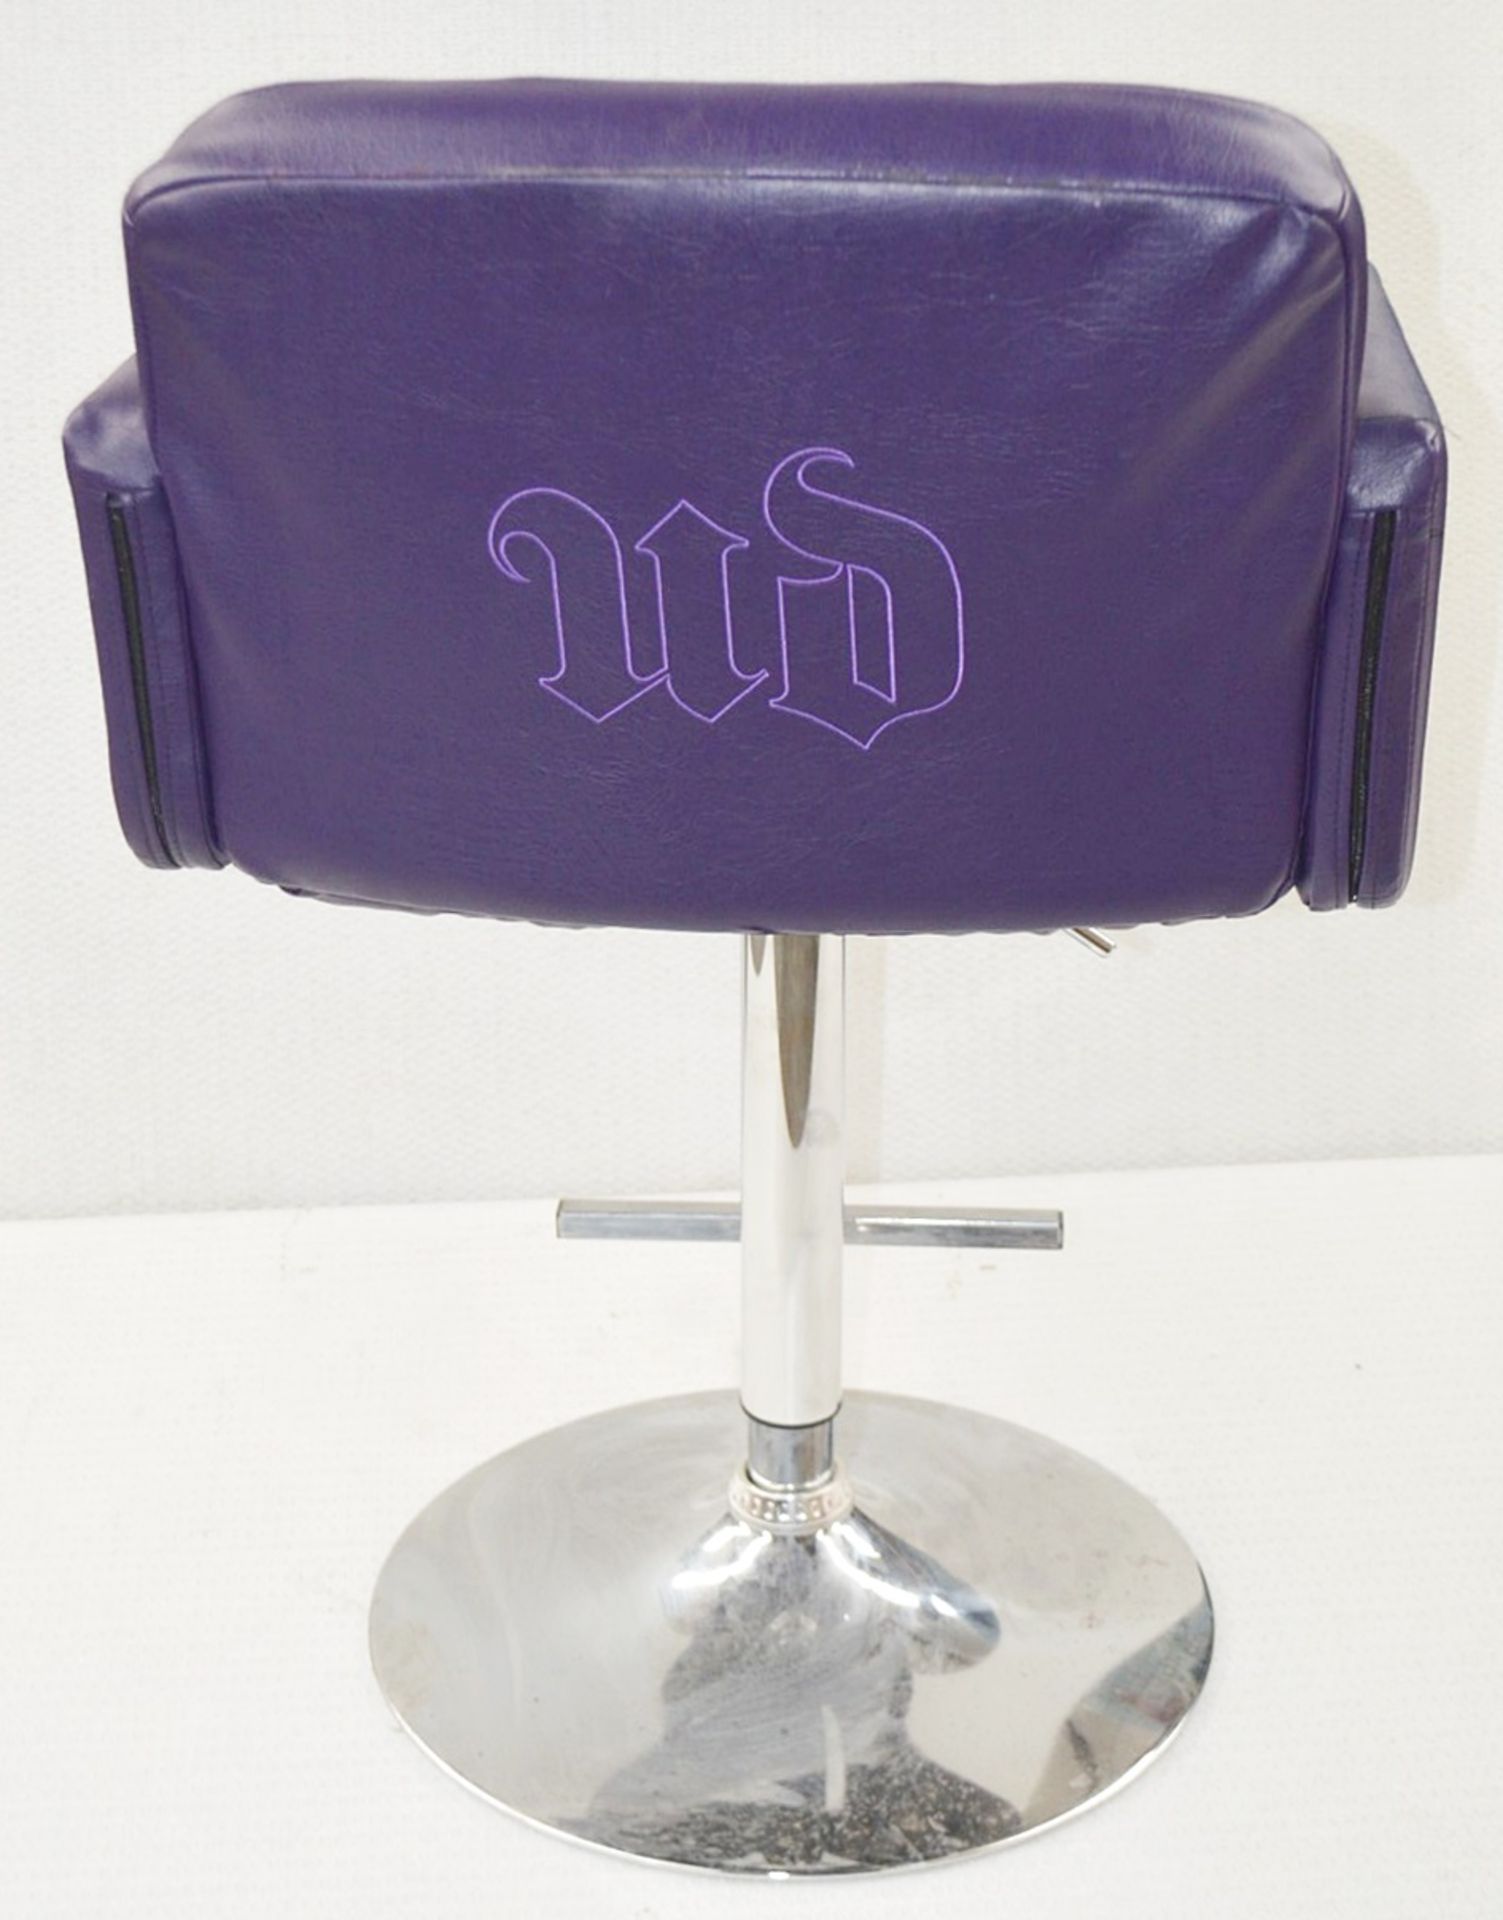 1 x URBAN DECAY Branded Gas-Lift Beauty Salon Swivel Chair With Foot Plate - Upholstered In Purple - Image 6 of 6